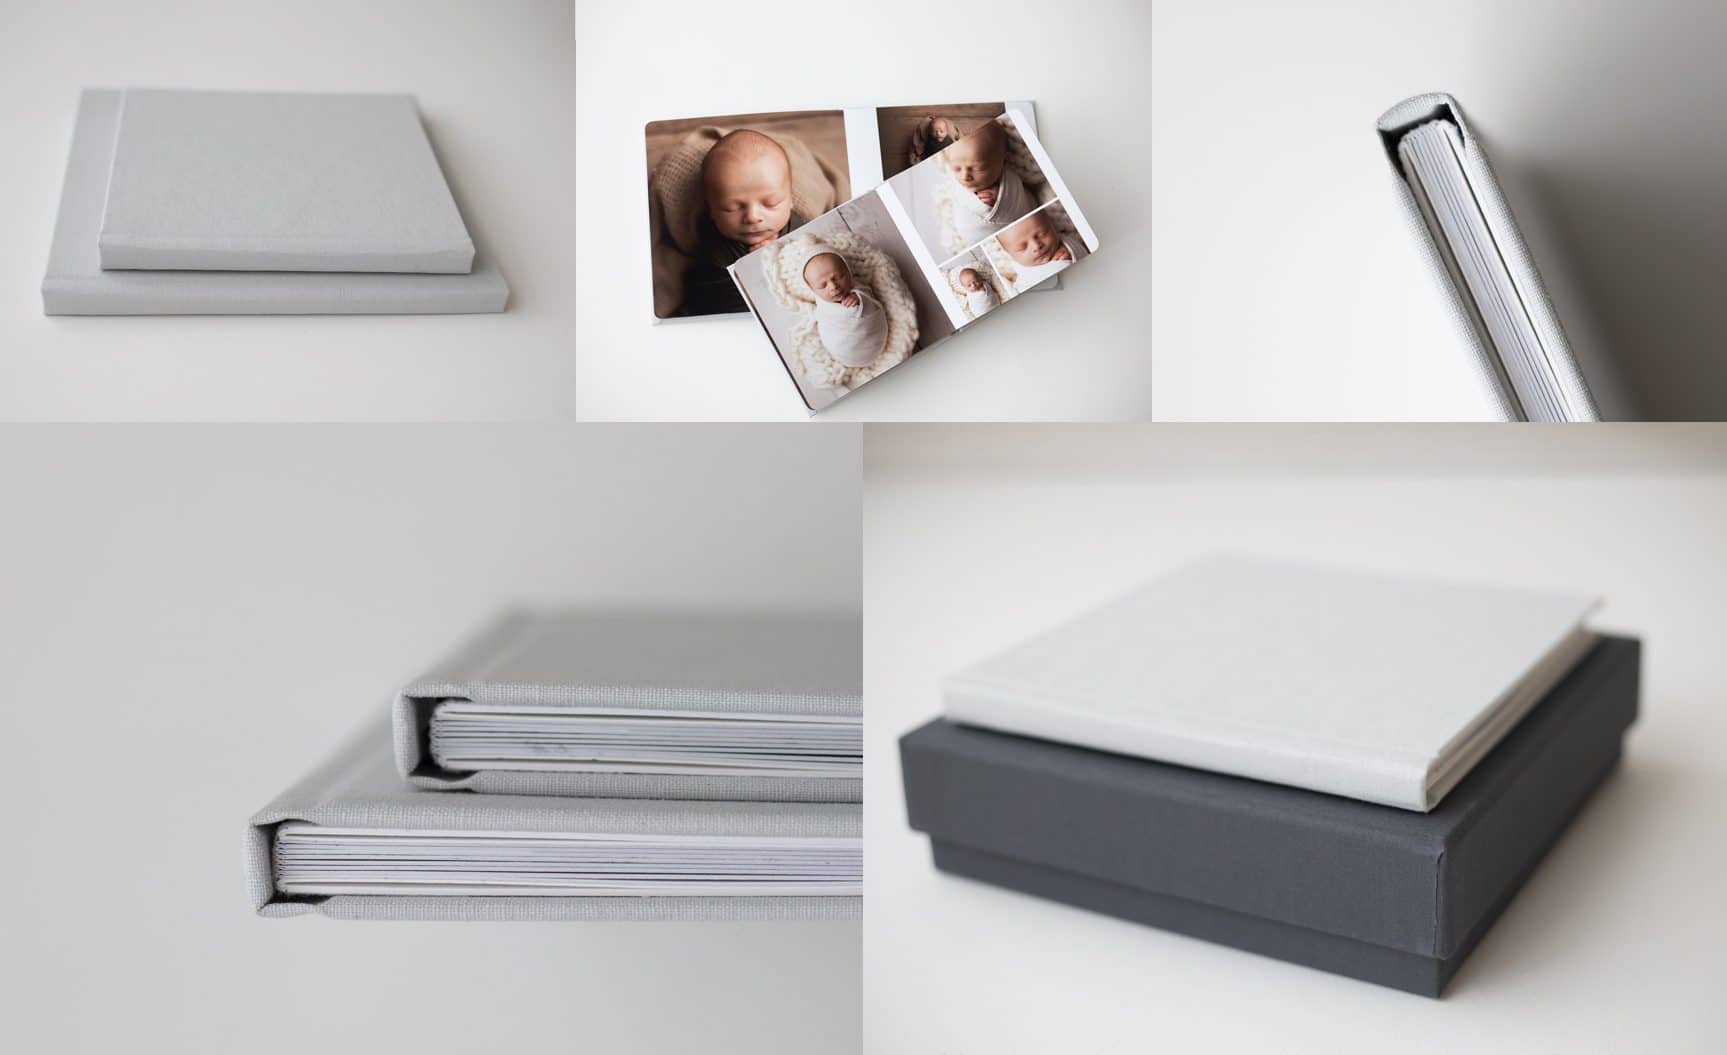 printing albums from your photography session